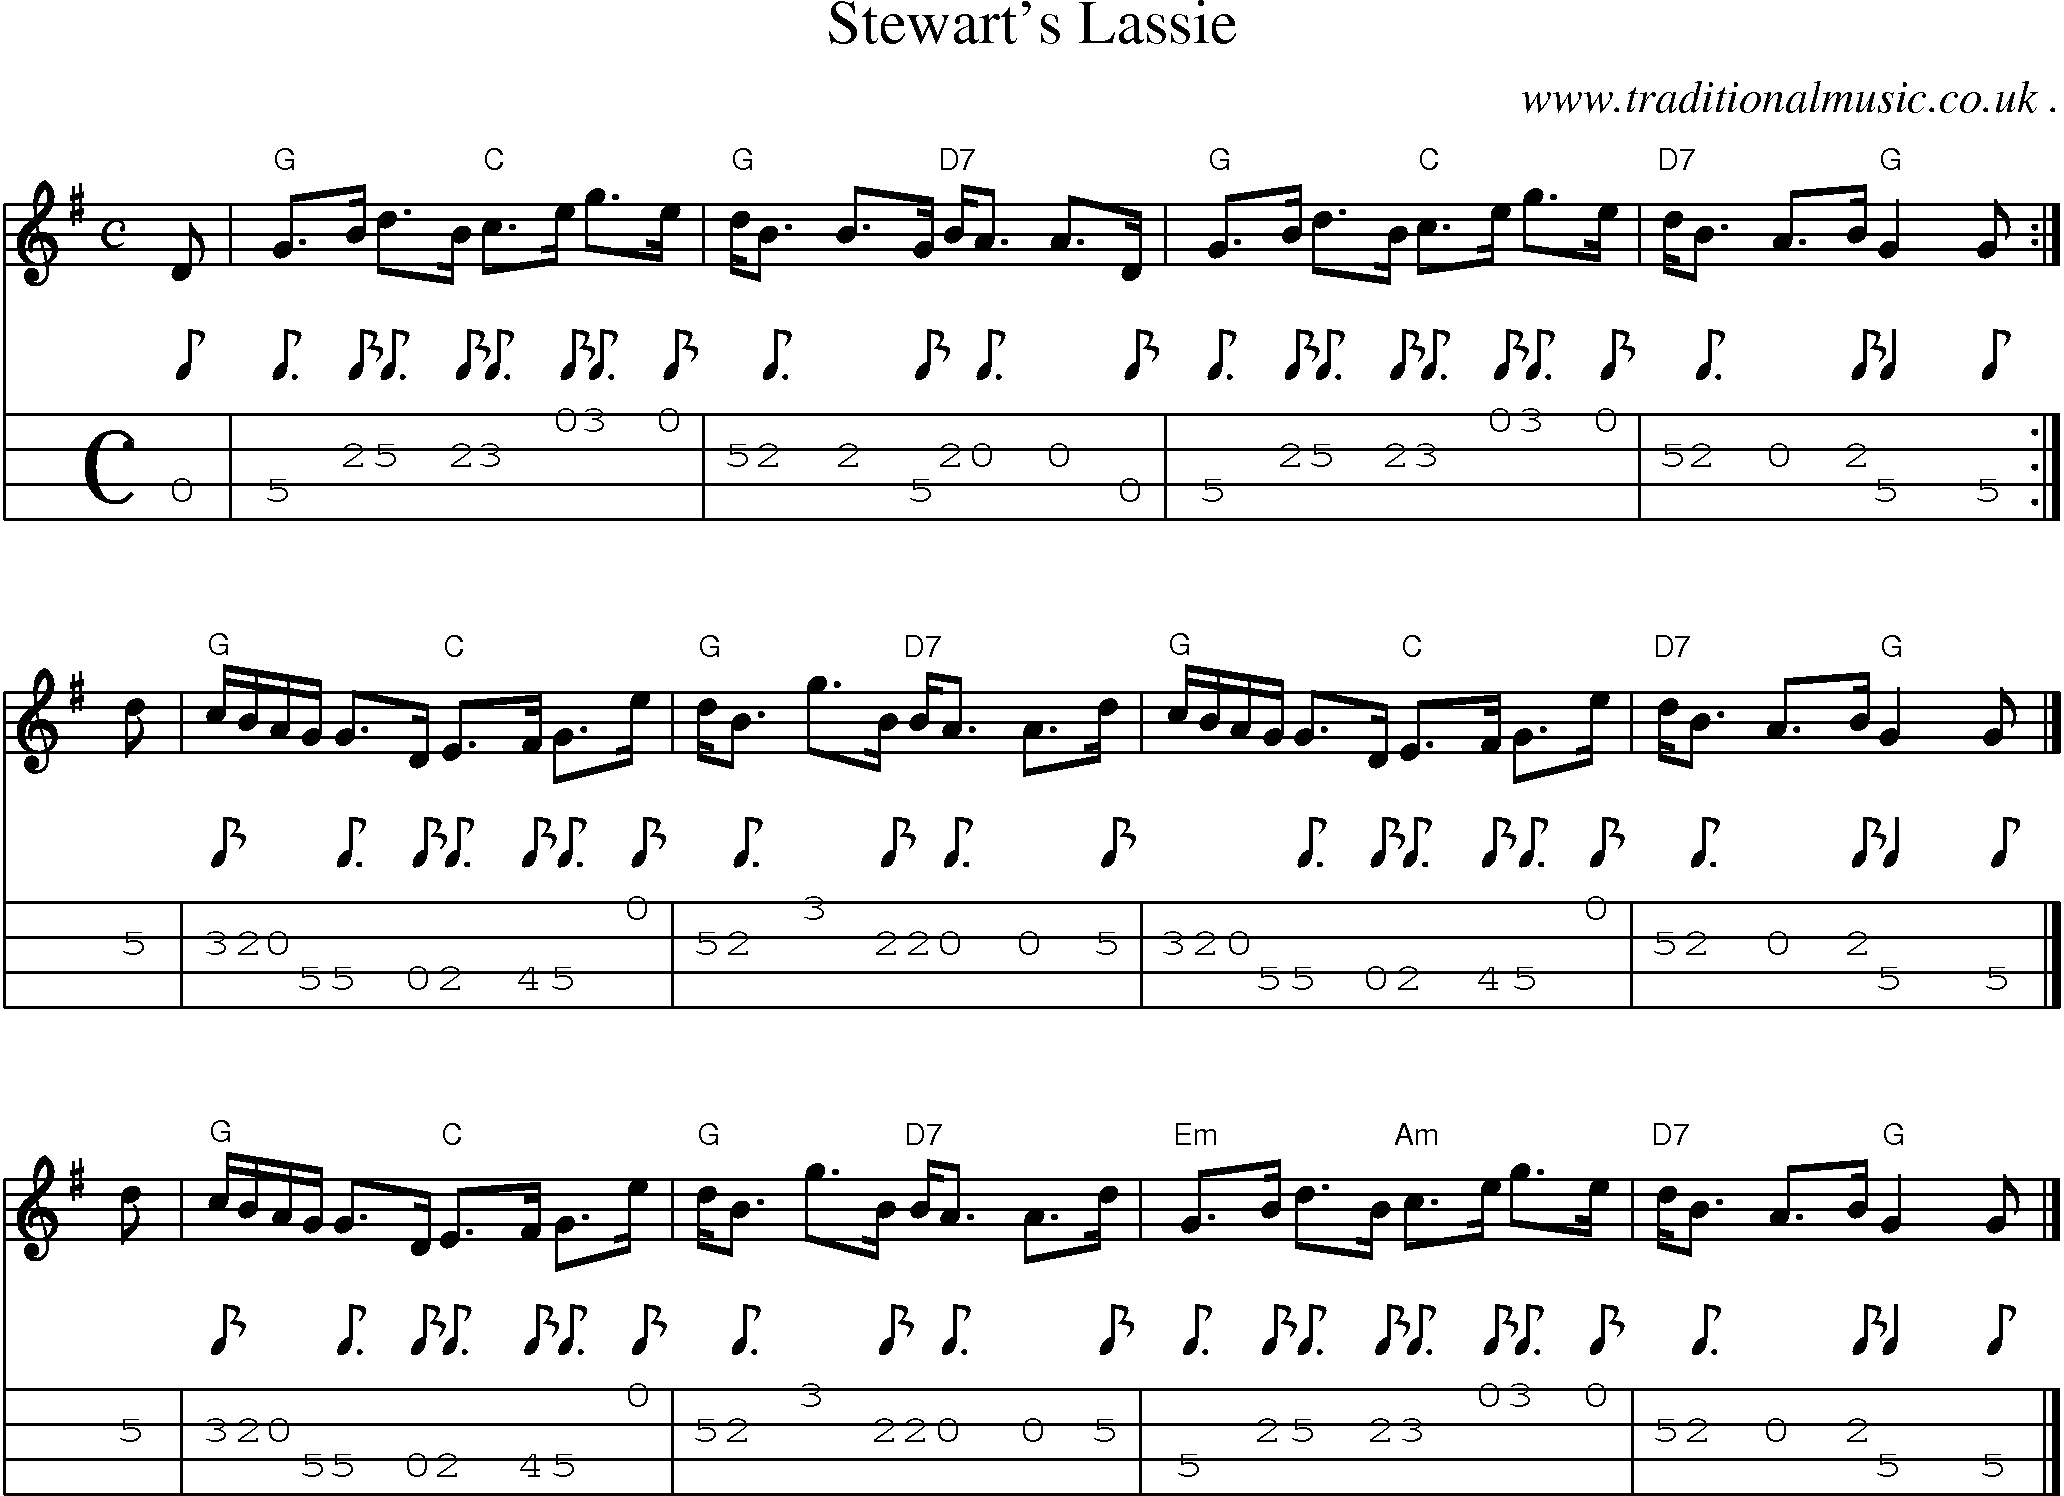 Sheet-music  score, Chords and Mandolin Tabs for Stewarts Lassie